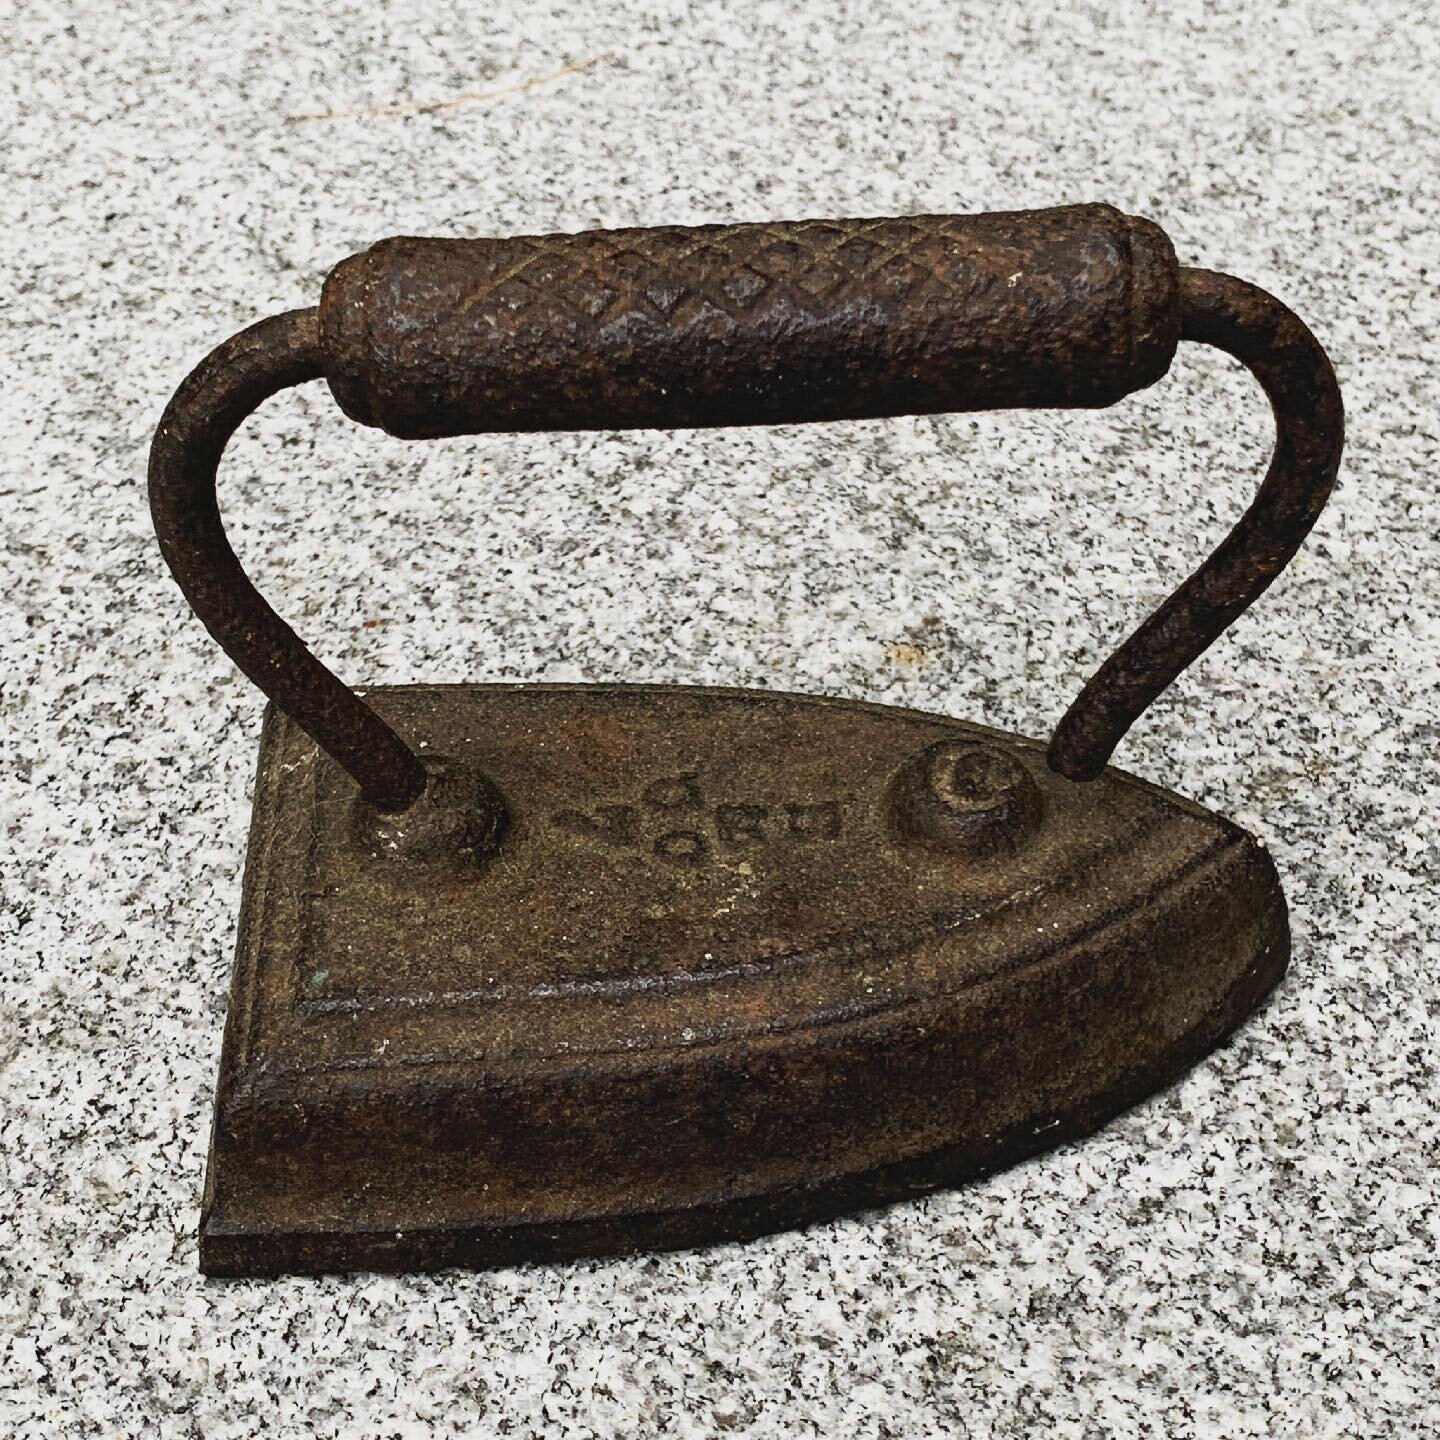 Monday was washing day; Tuesday was ironing day. This cast &ldquo;sad&rdquo; iron (derived from &ldquo;solid&rdquo;) was heated in a fire or on coals to press sheets and clothes&hellip; Who used this iron, and what garment did they use it to press? W